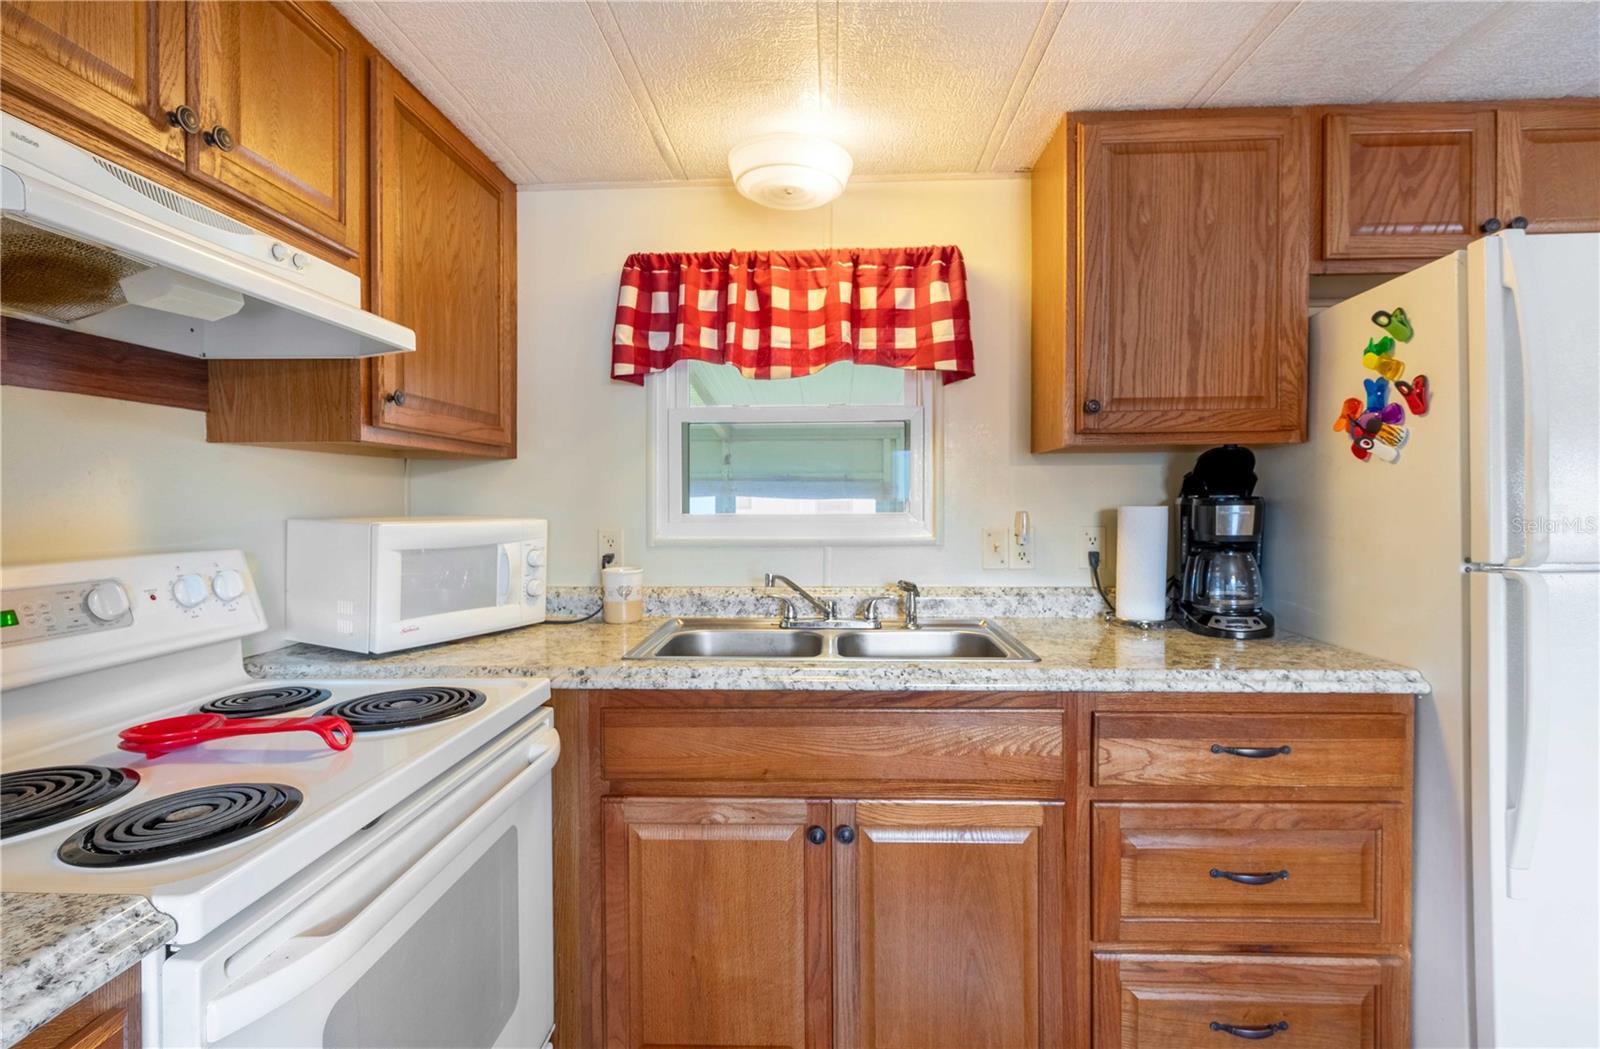 Kitchen has updated wood cabinets, range, microwave, and refrigerator.